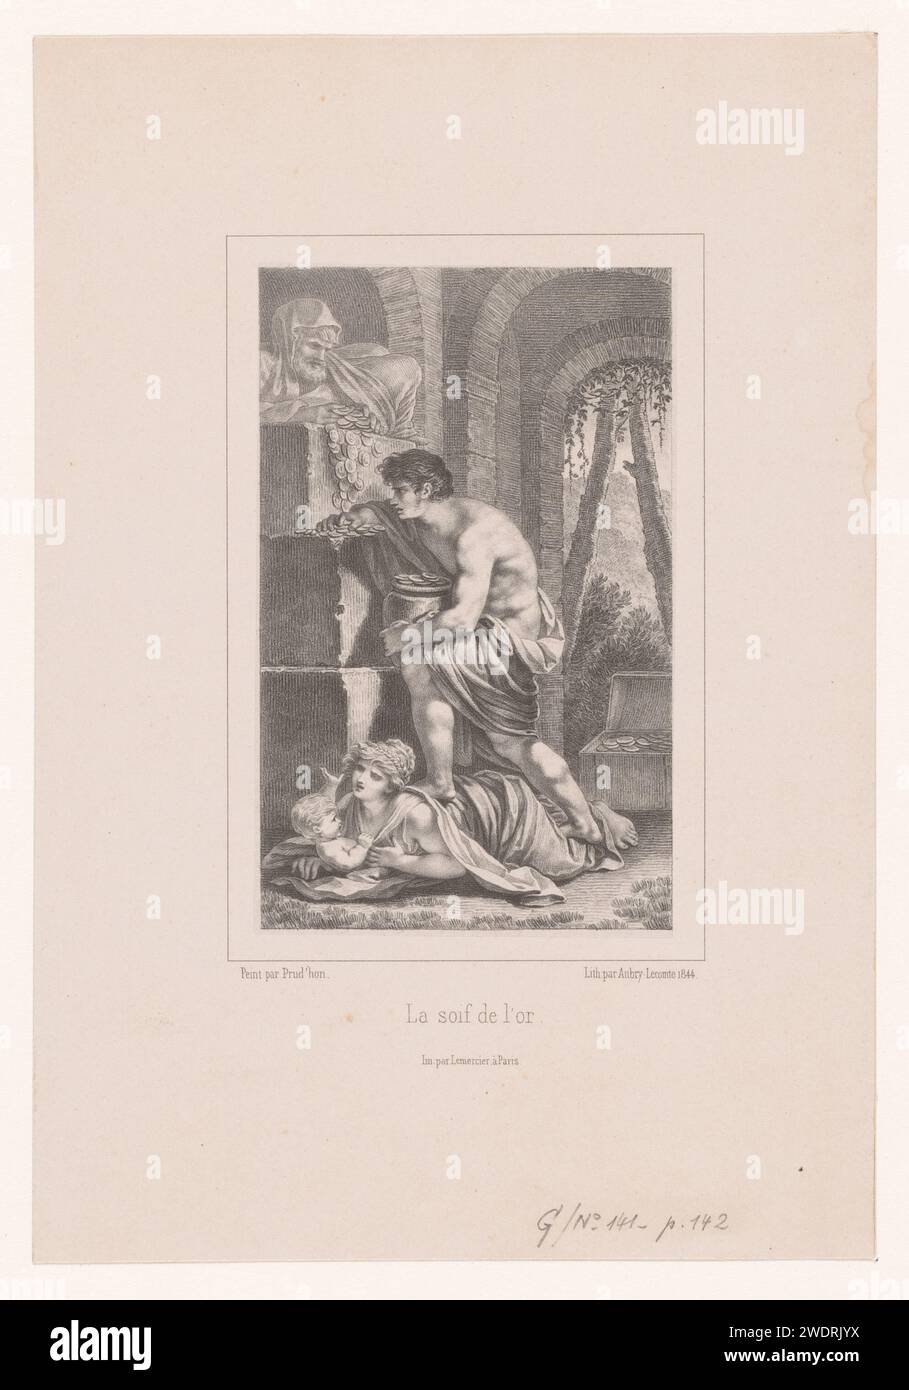 Edouard in Het Goud, Hyacinthe Louis Victor Jean Baptiste Aubry-Lecomte, after Pierre Prud'hon, 1844 print UIT scene 'The Indian tribe' van Lucien Bonaparte. Paris paper  literary characters and objects. treasure hunting, goldrush Stock Photo